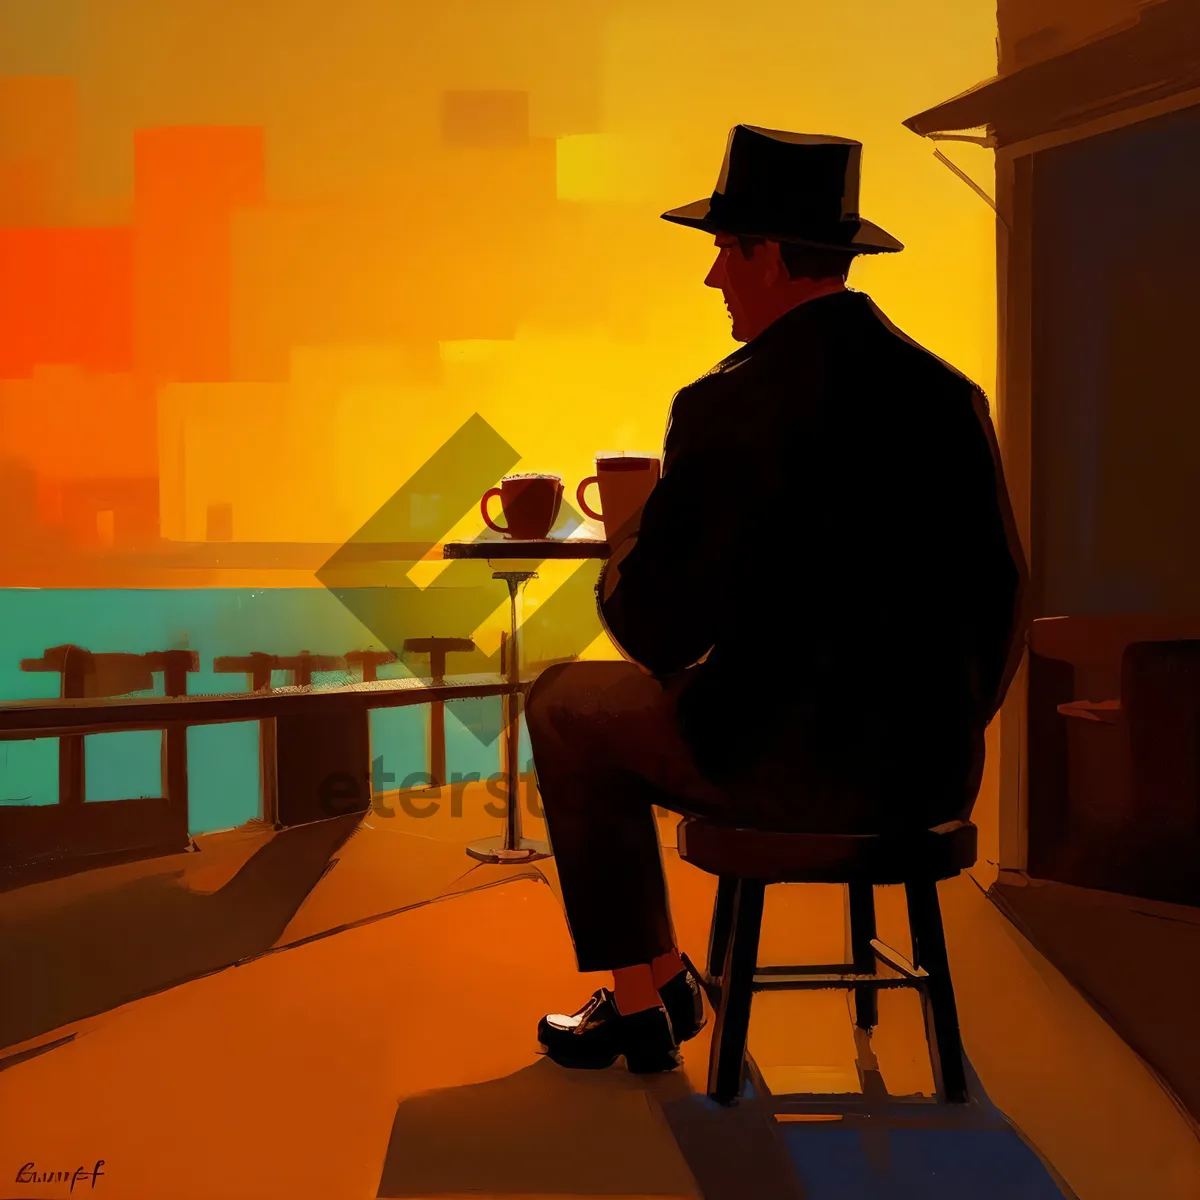 Picture of Scholarly Cowboy: Man in Silhouette with a Hat